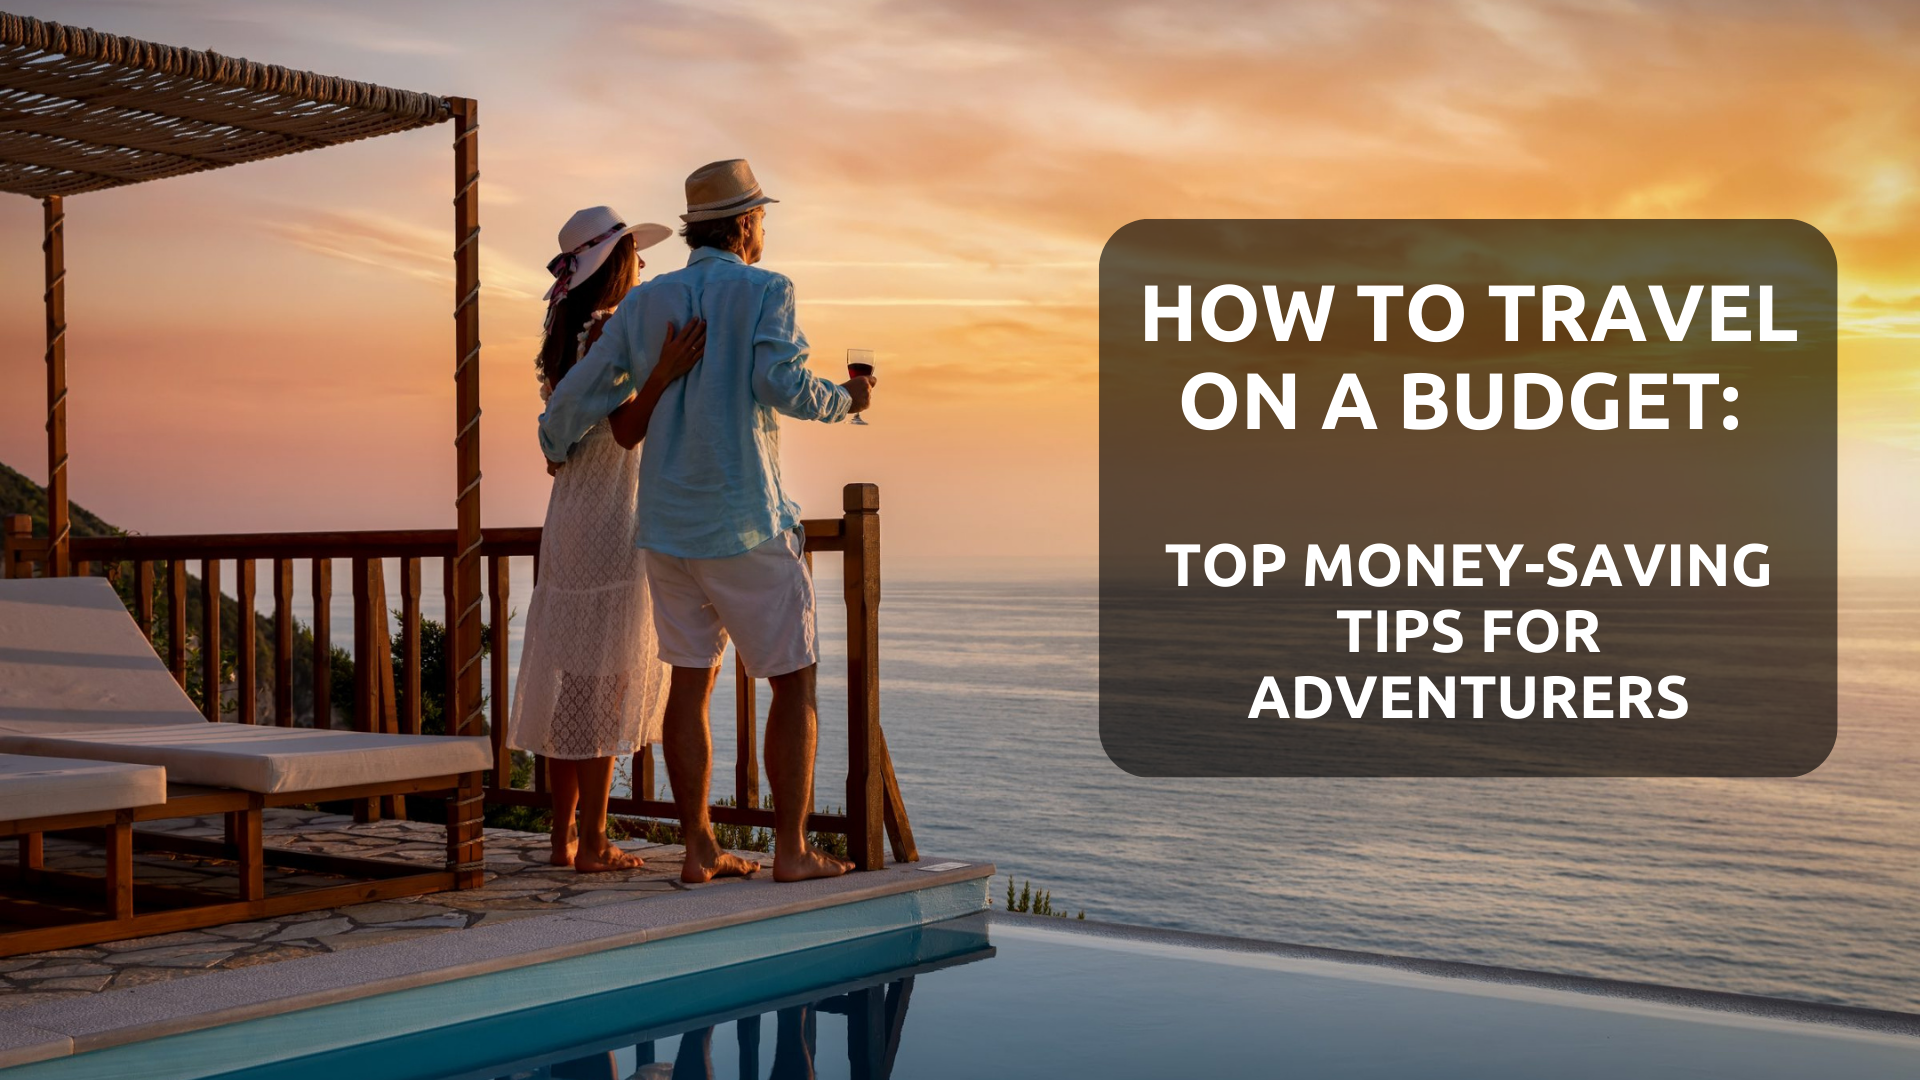 How to Travel on a Budget: Top Money-Saving Tips for Adventurers